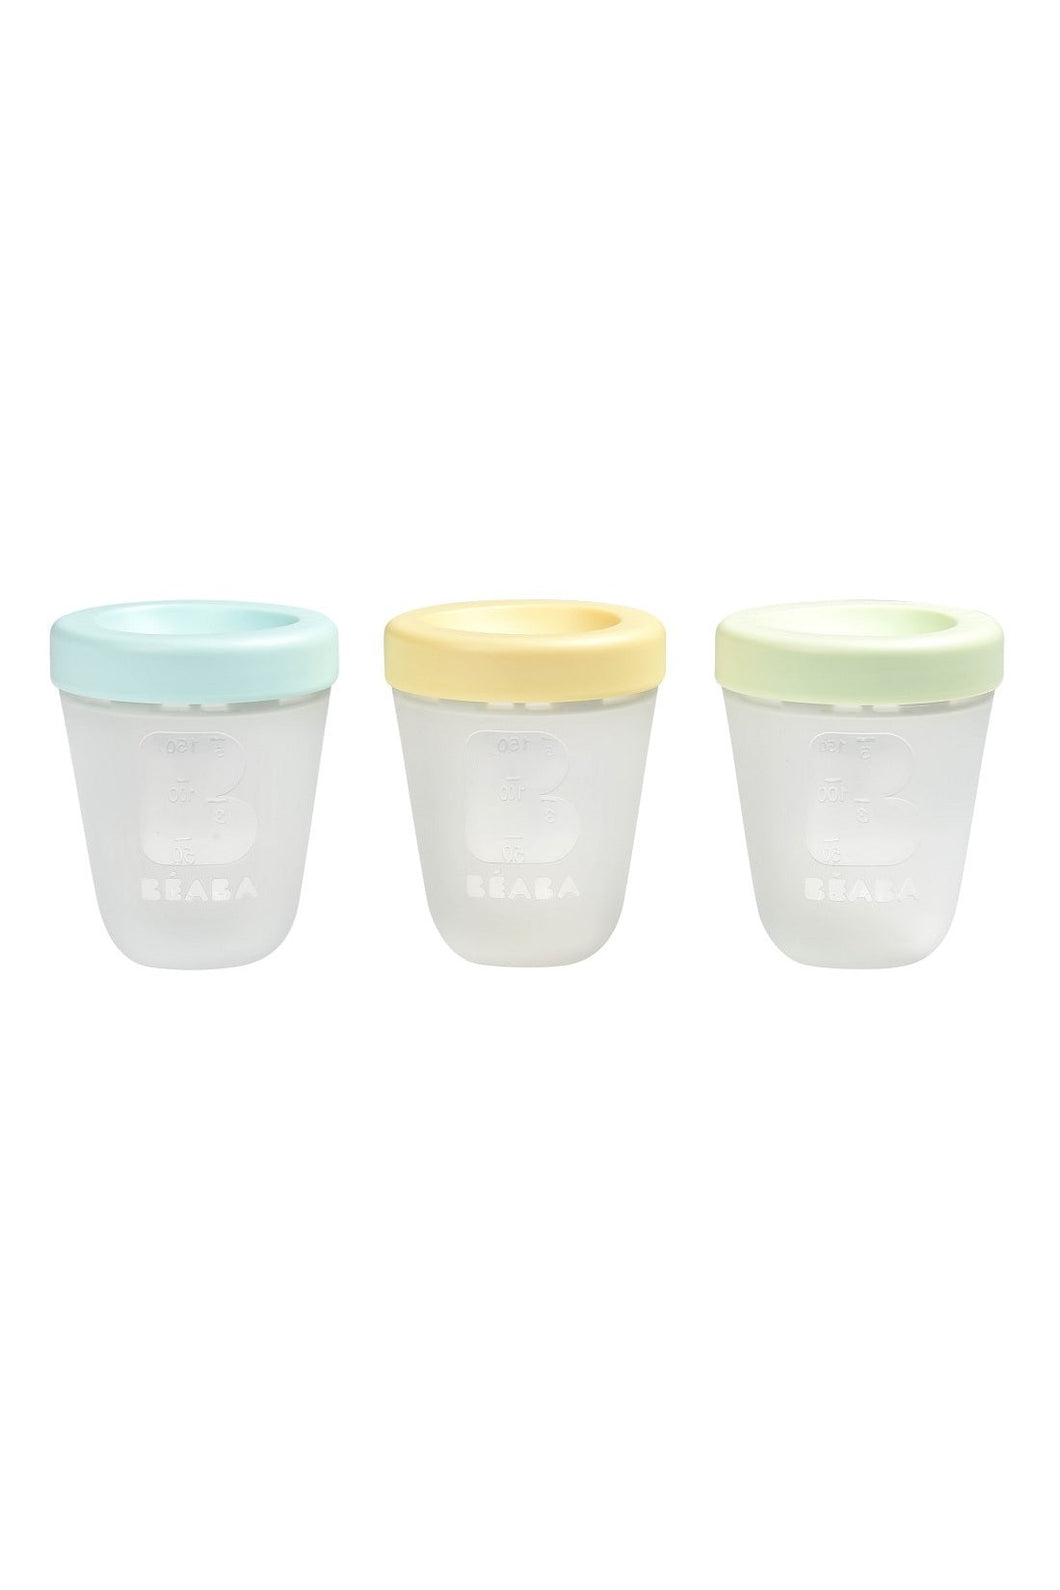 Beaba Set Of 3 X 200Ml Silicone Portions Spring 1